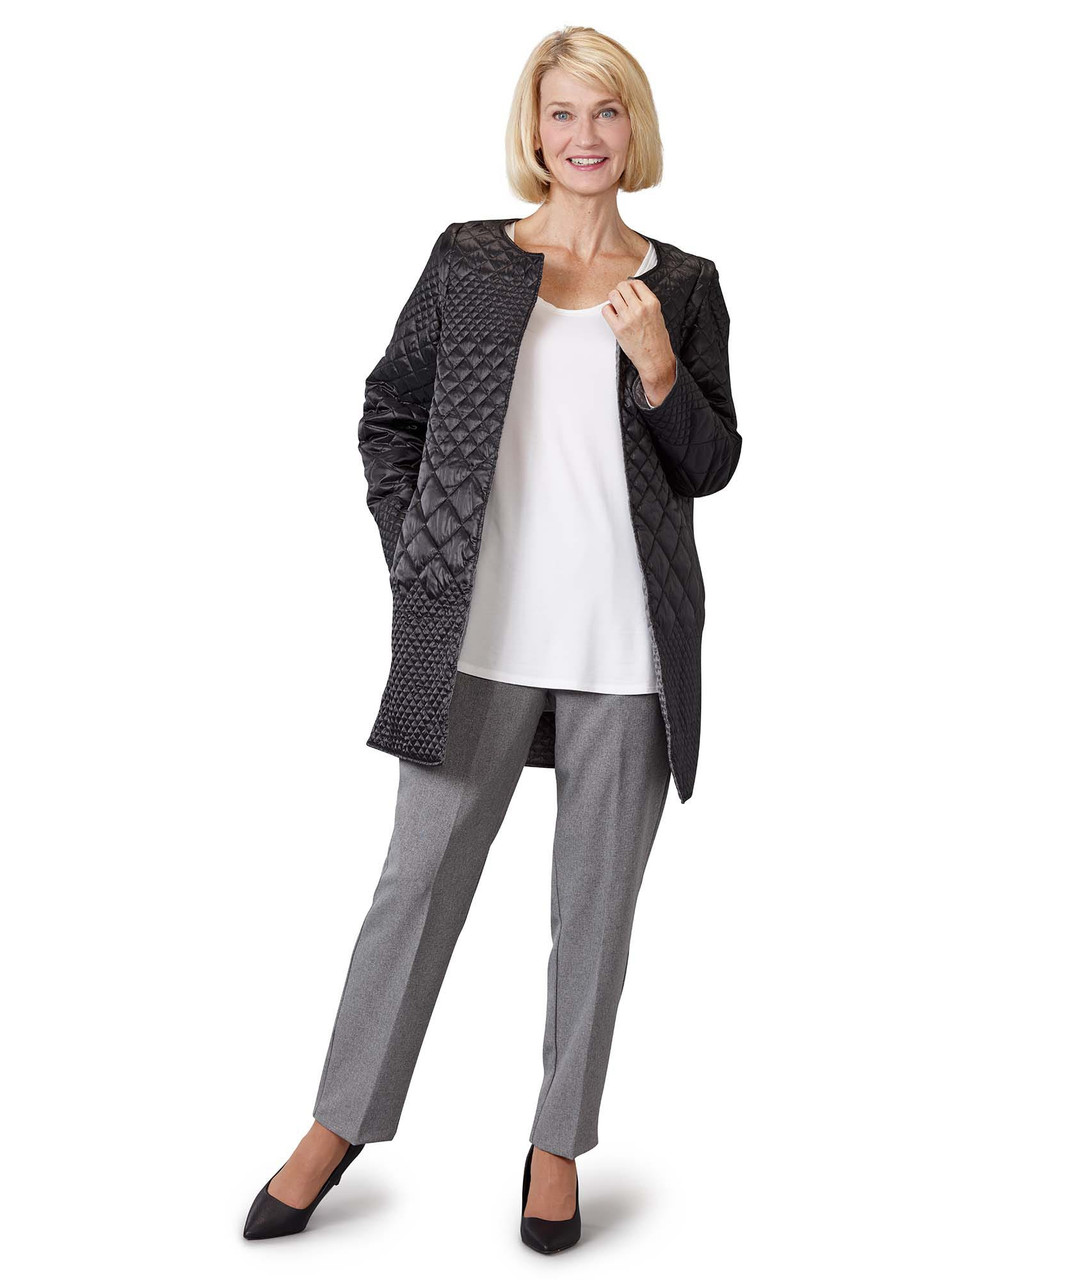 Silverts SV27040 Womens Reversible Quilted Jacket with Detachable Sleeves Black/Silver, Size=S, SV27040-SV1452-S